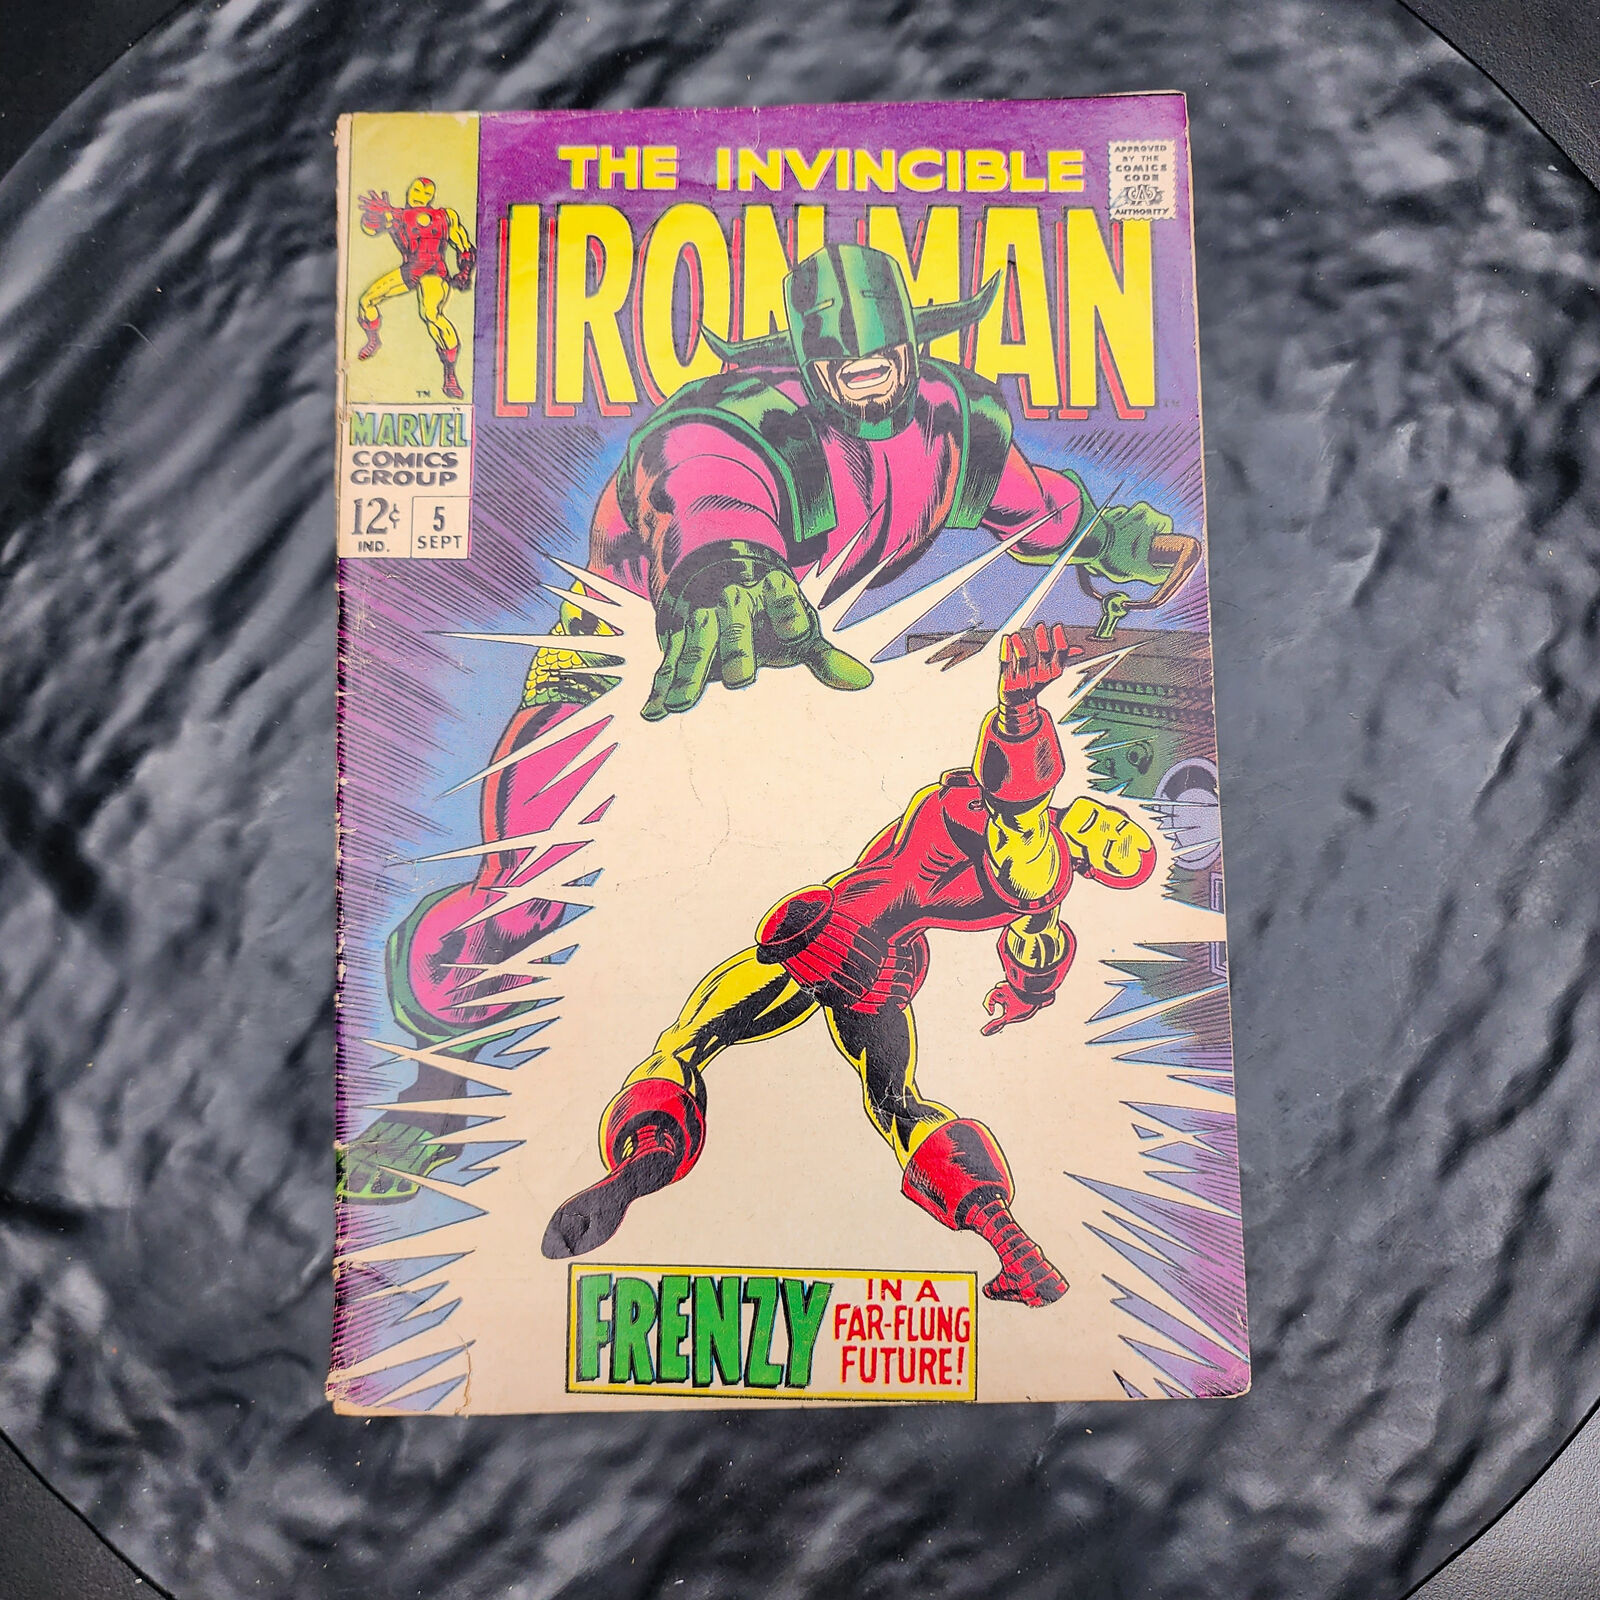 The Invincible Iron Man #5 Sep 1968, Marvel Comic, Vintage, Collectible